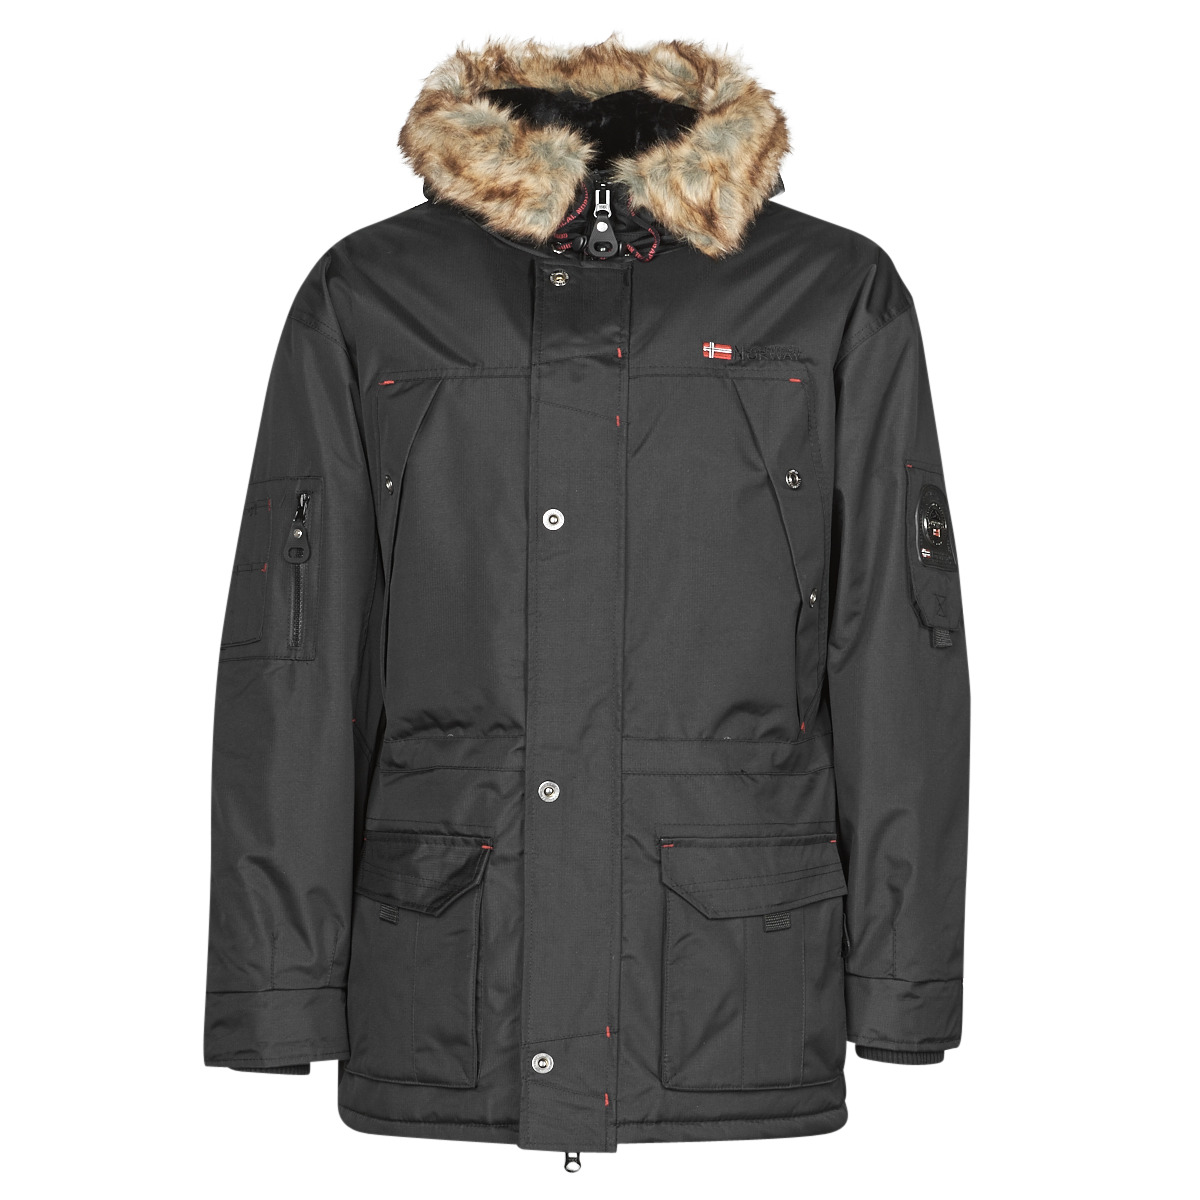 Geographical Norway - Parka para mujer con capucha (Negro, L